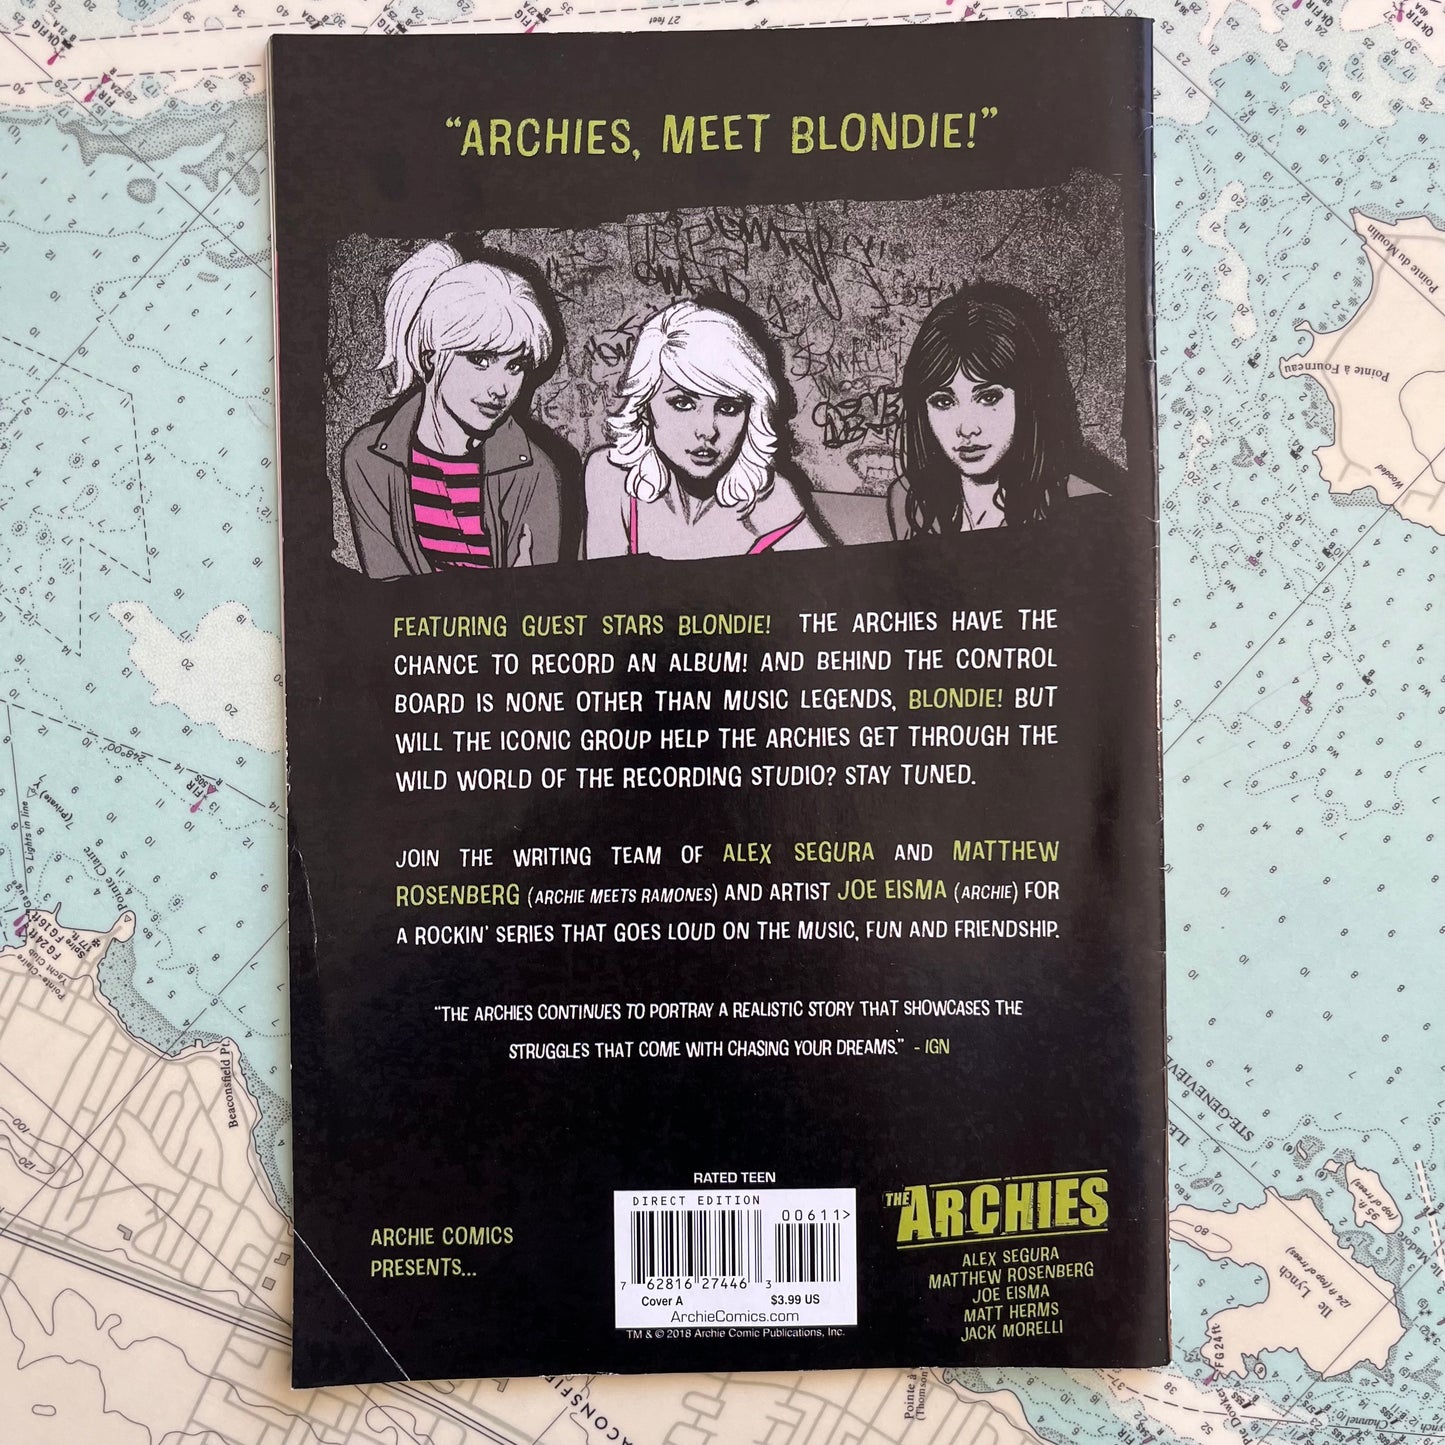 2018 The Archies #6 Guest Starring Blondie Comic Book